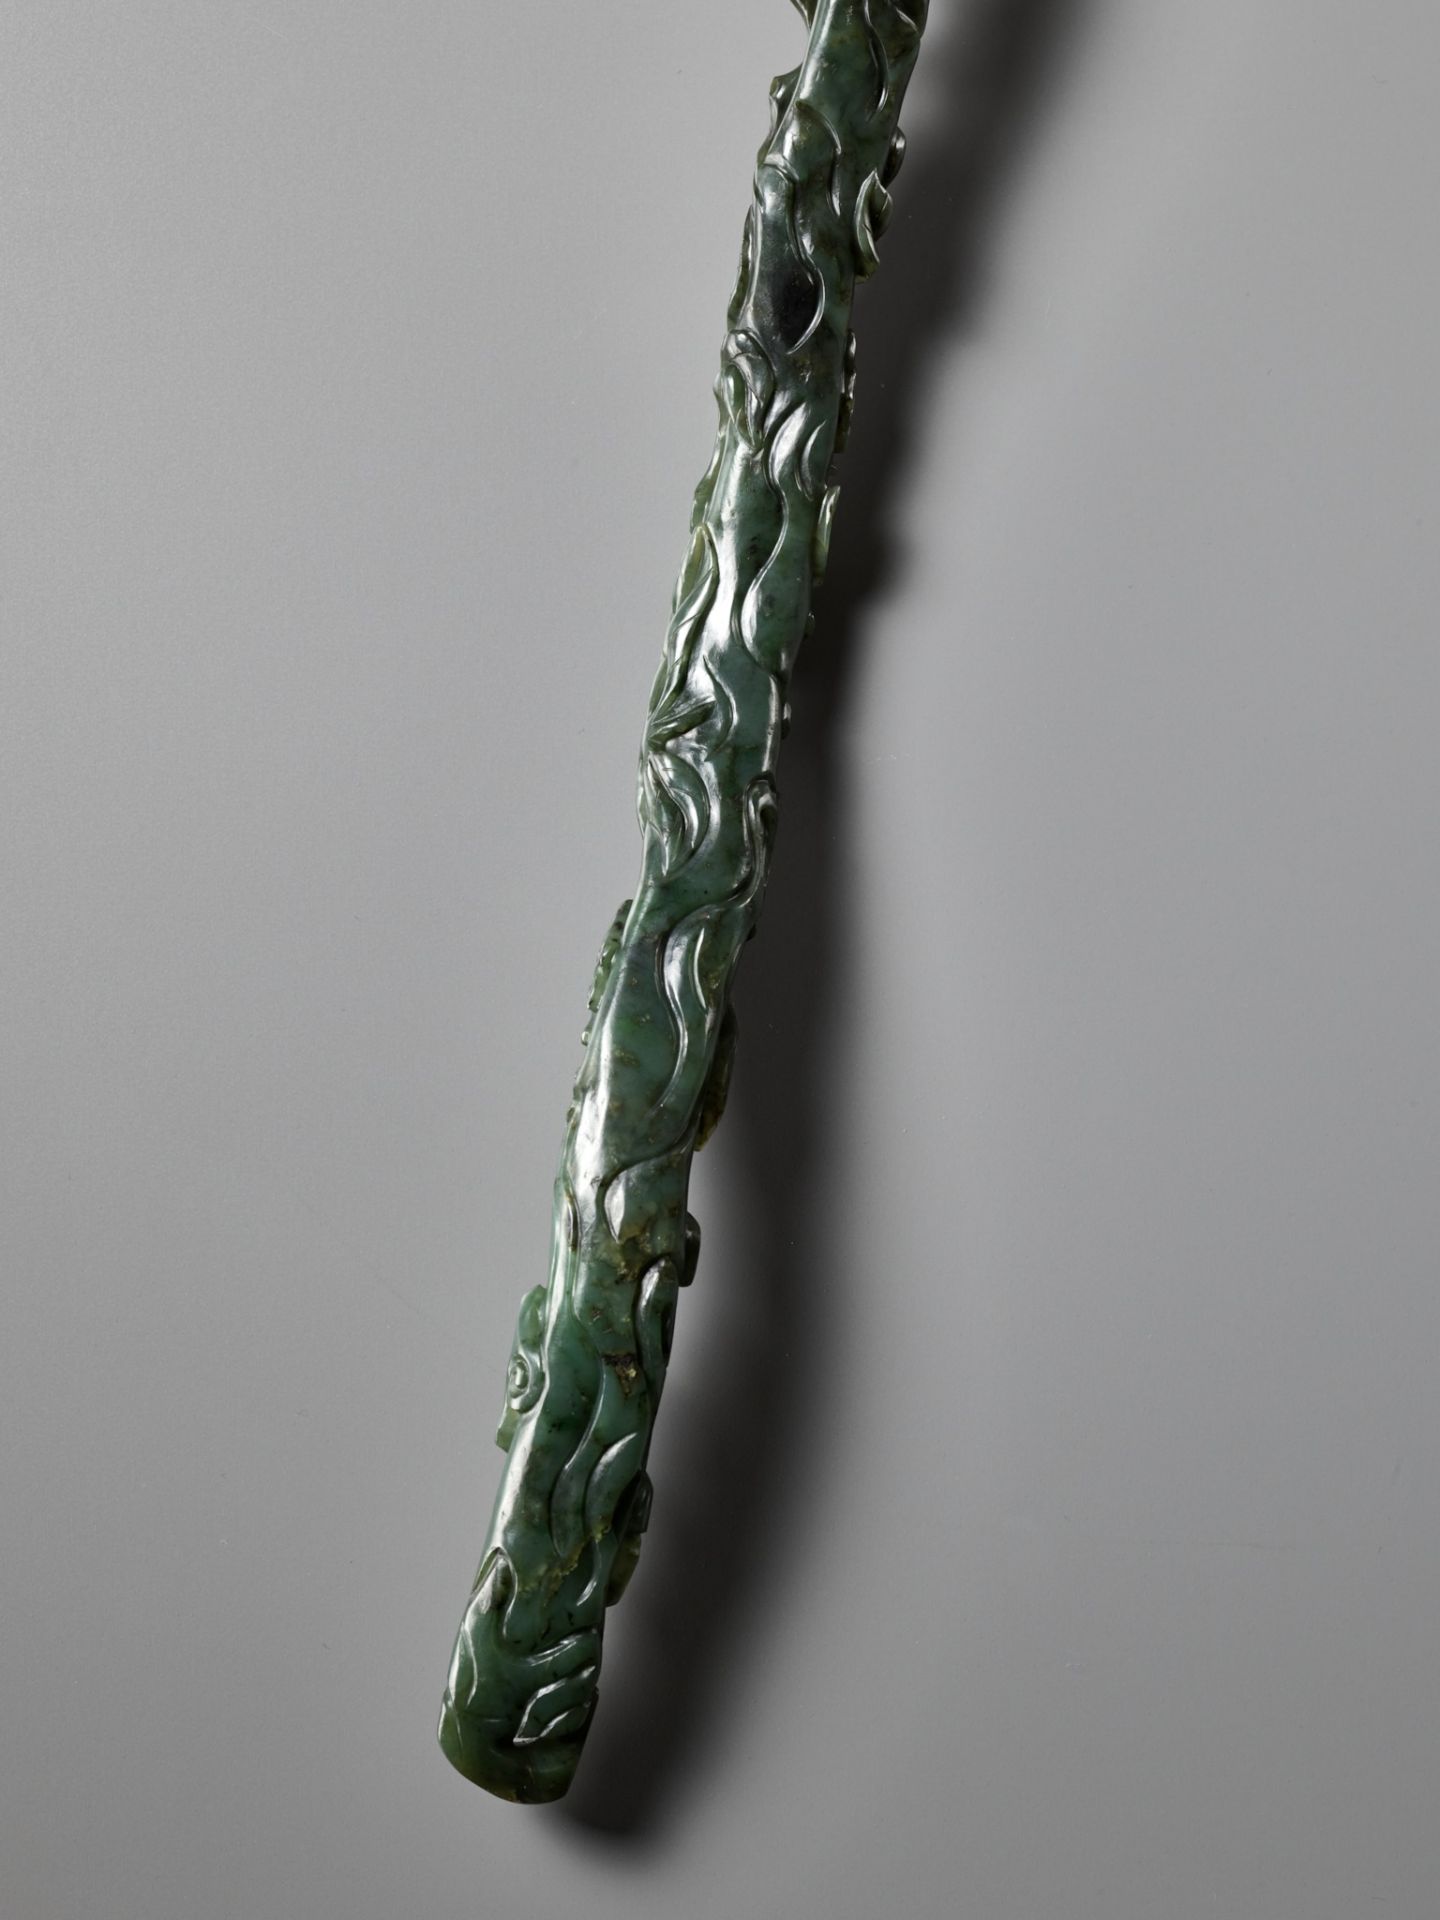 A SPINACH-GREEN JADE 'LINGZHI AND FINGER CITRON' RUYI SCEPTER, CHINA, 18TH CENTURY - Image 12 of 14